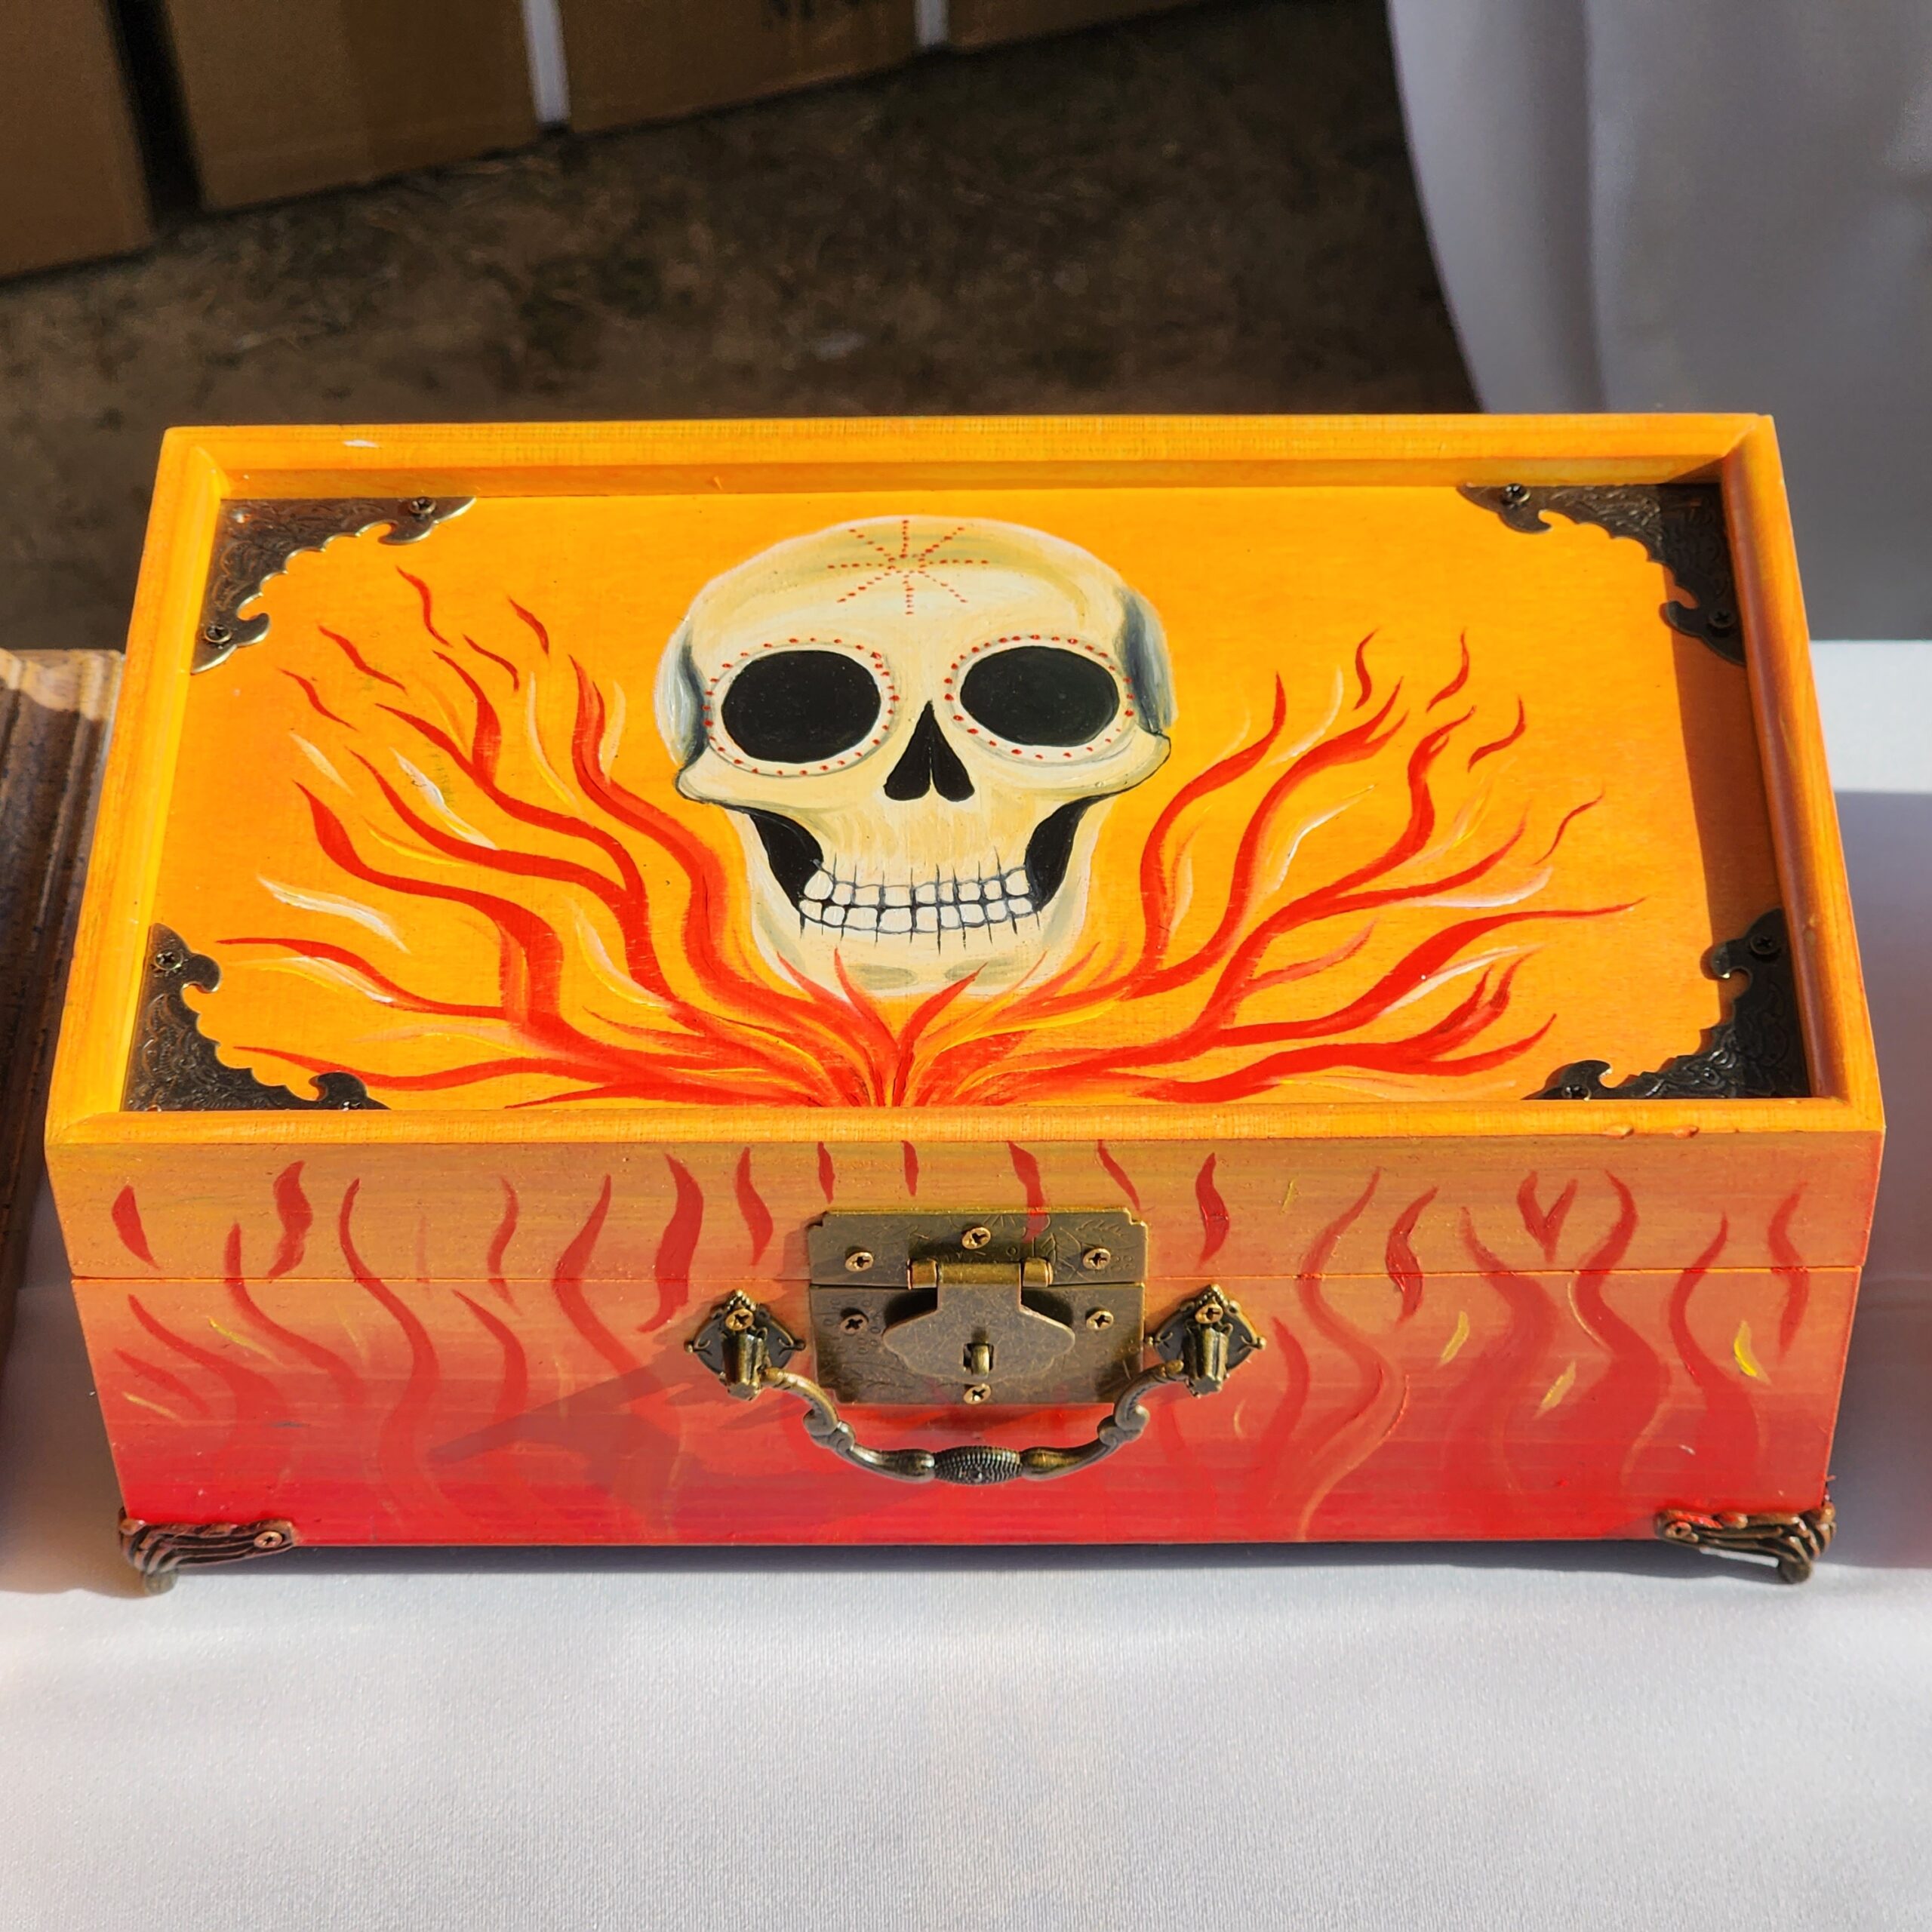 Beautiful handpainted wooden trinket box with a mirror and metal feet. This cute skull trinket box is an ideal gift for a special loved one. You can store jewelry such as rings, necklaces, bracelets, or anything you would like to keep in a particular place, especially in this elegant and artistic trinket box.